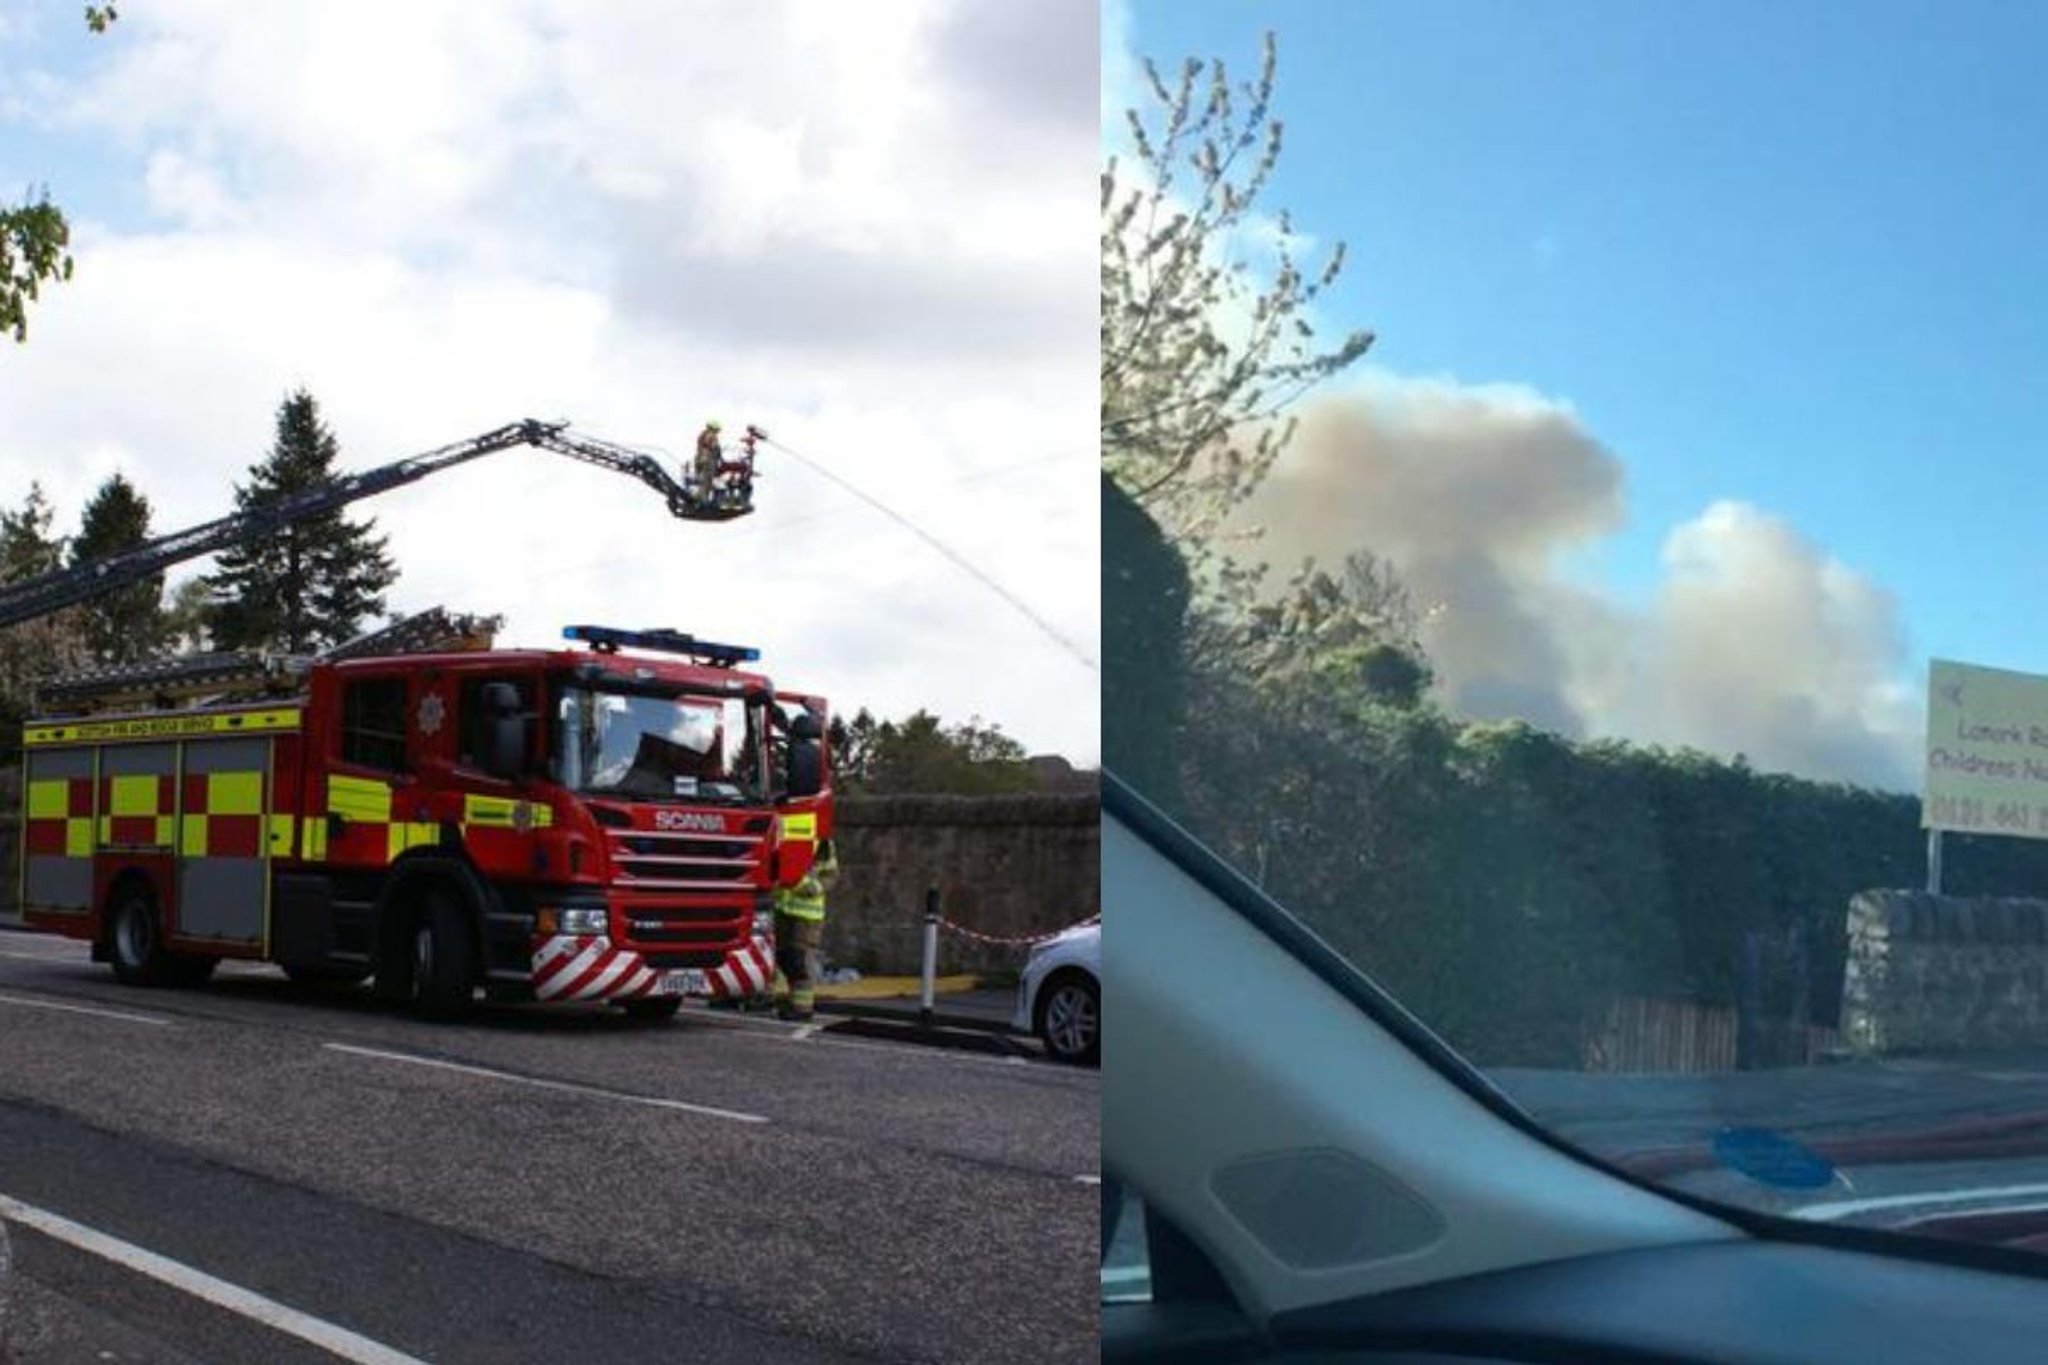 Pictures show crews tackling 'well developed' fire at Edinburgh nursery